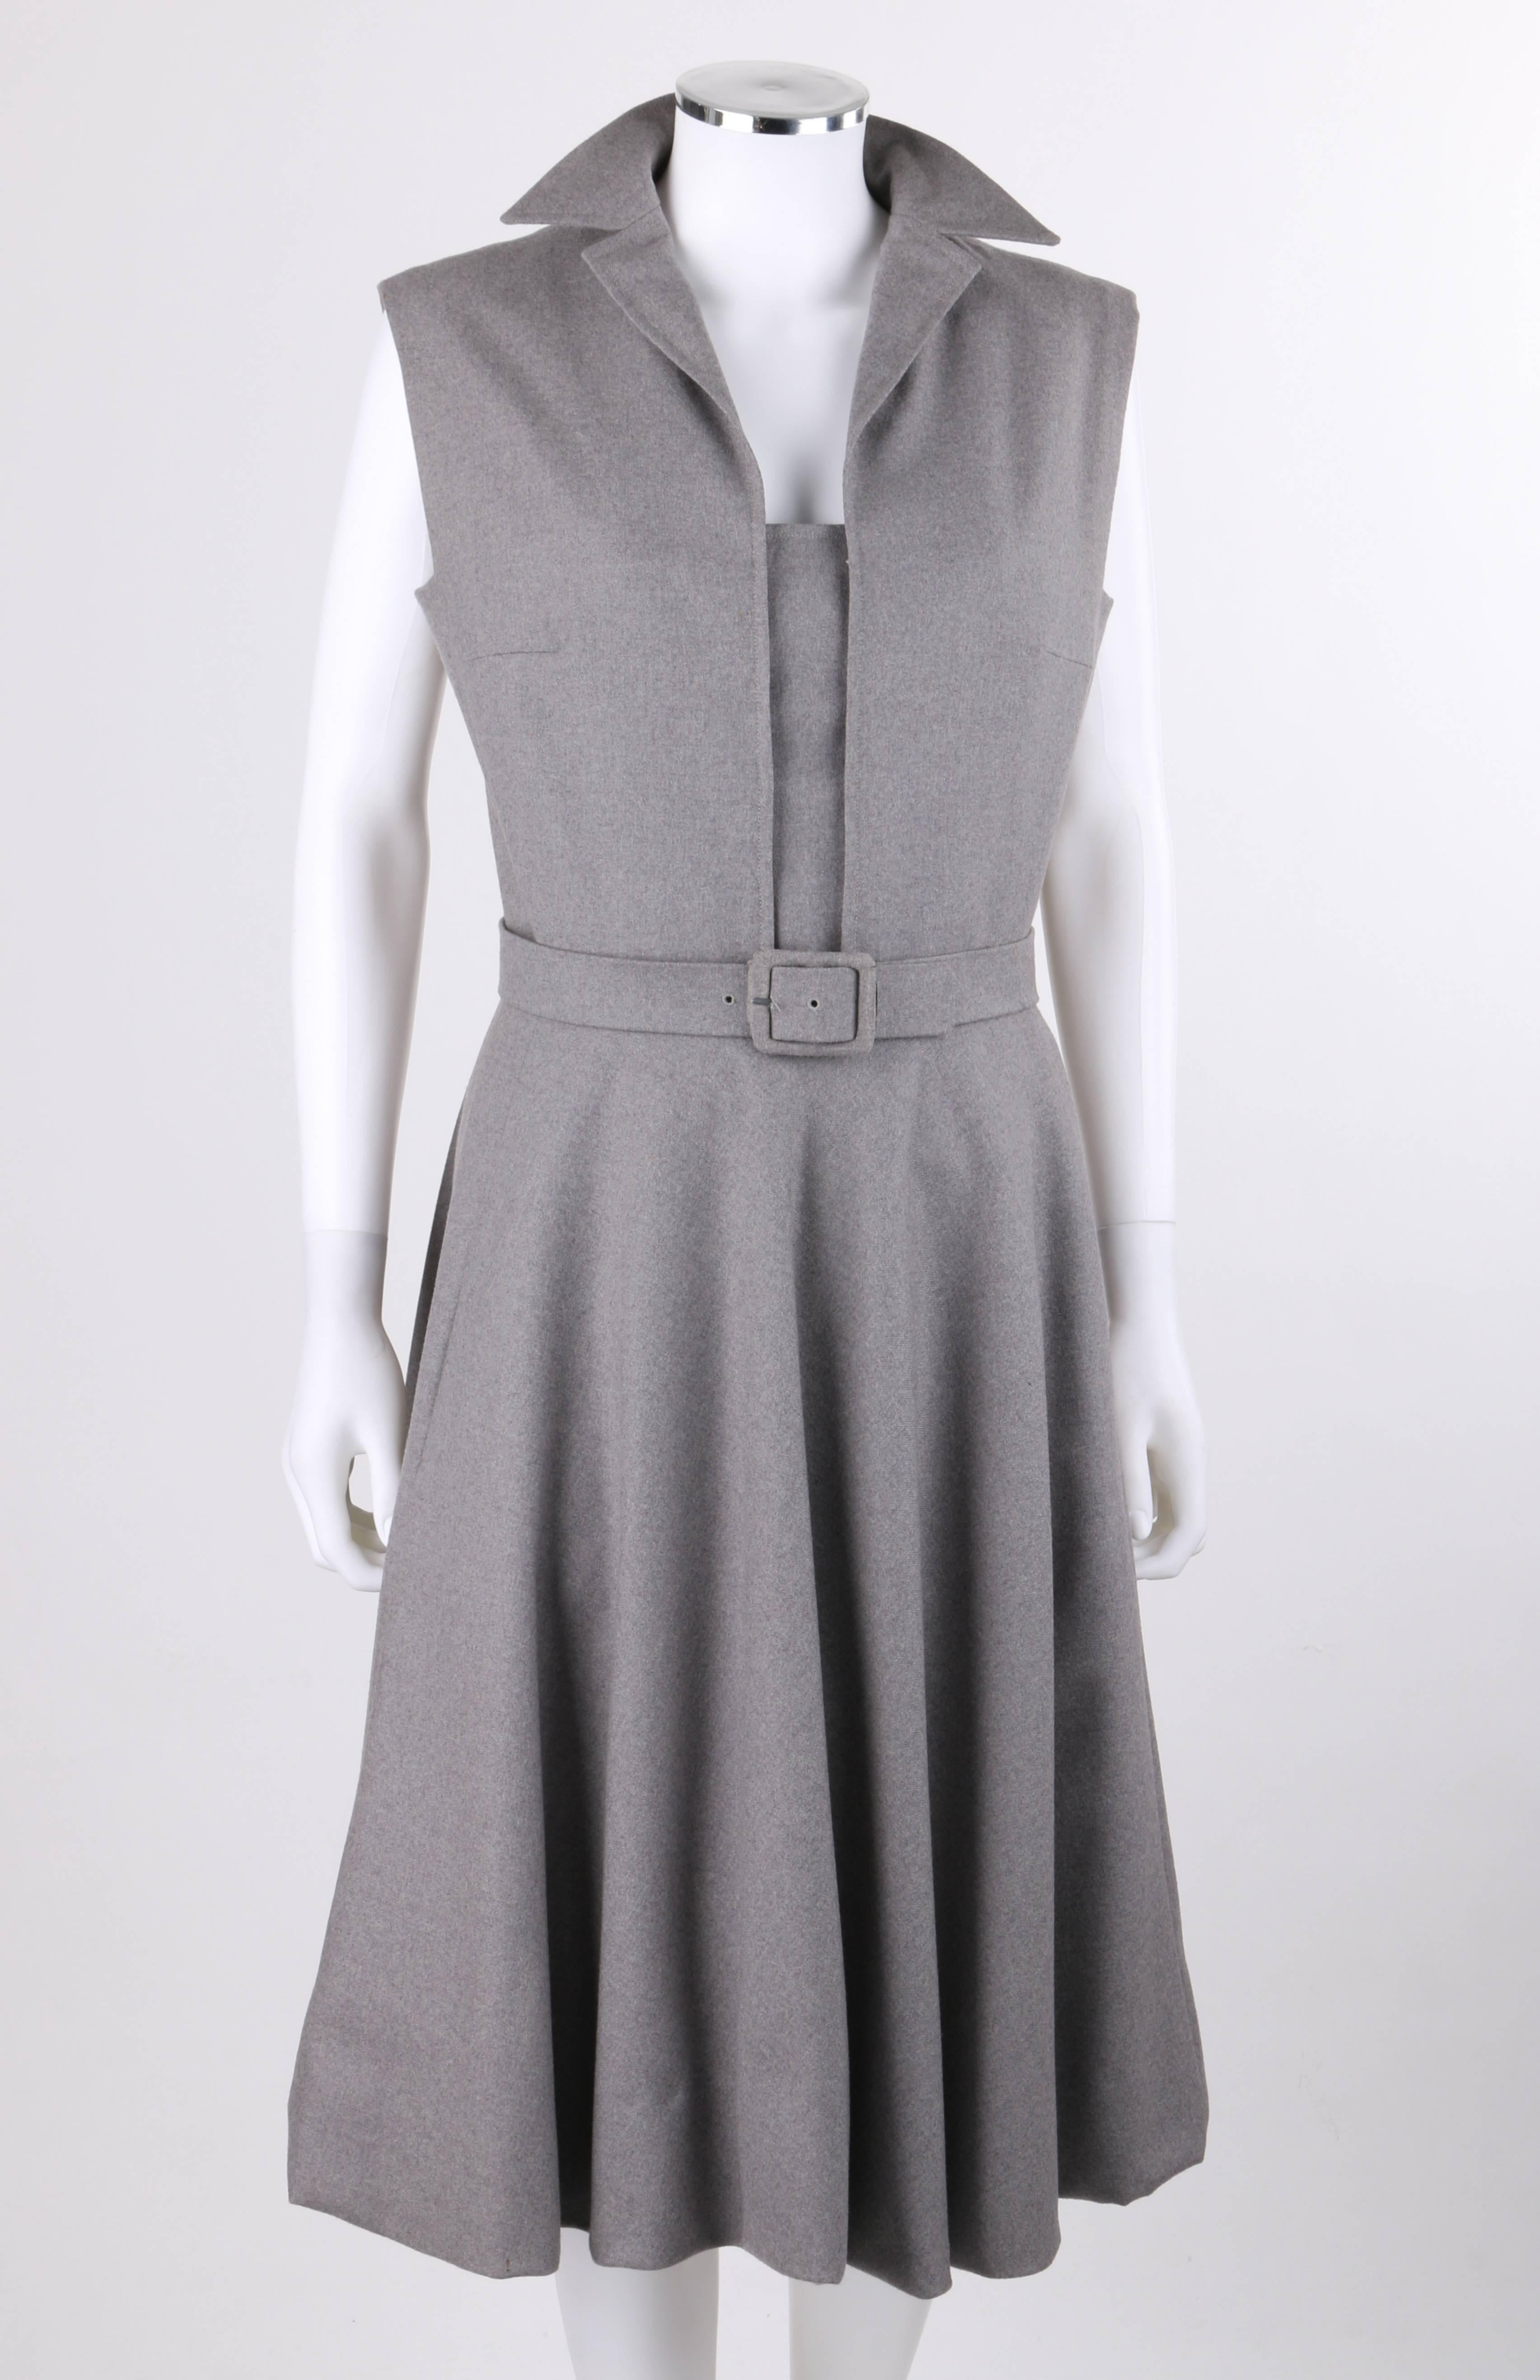 Vintage Pauline Trigere c.1980's gray wool belted day dress. Extended shoulder bodice with square cut arm holes. Notched lapel collar. Center front removable modesty panel with five snap closures on either side. Two front inseam hip pockets. Two